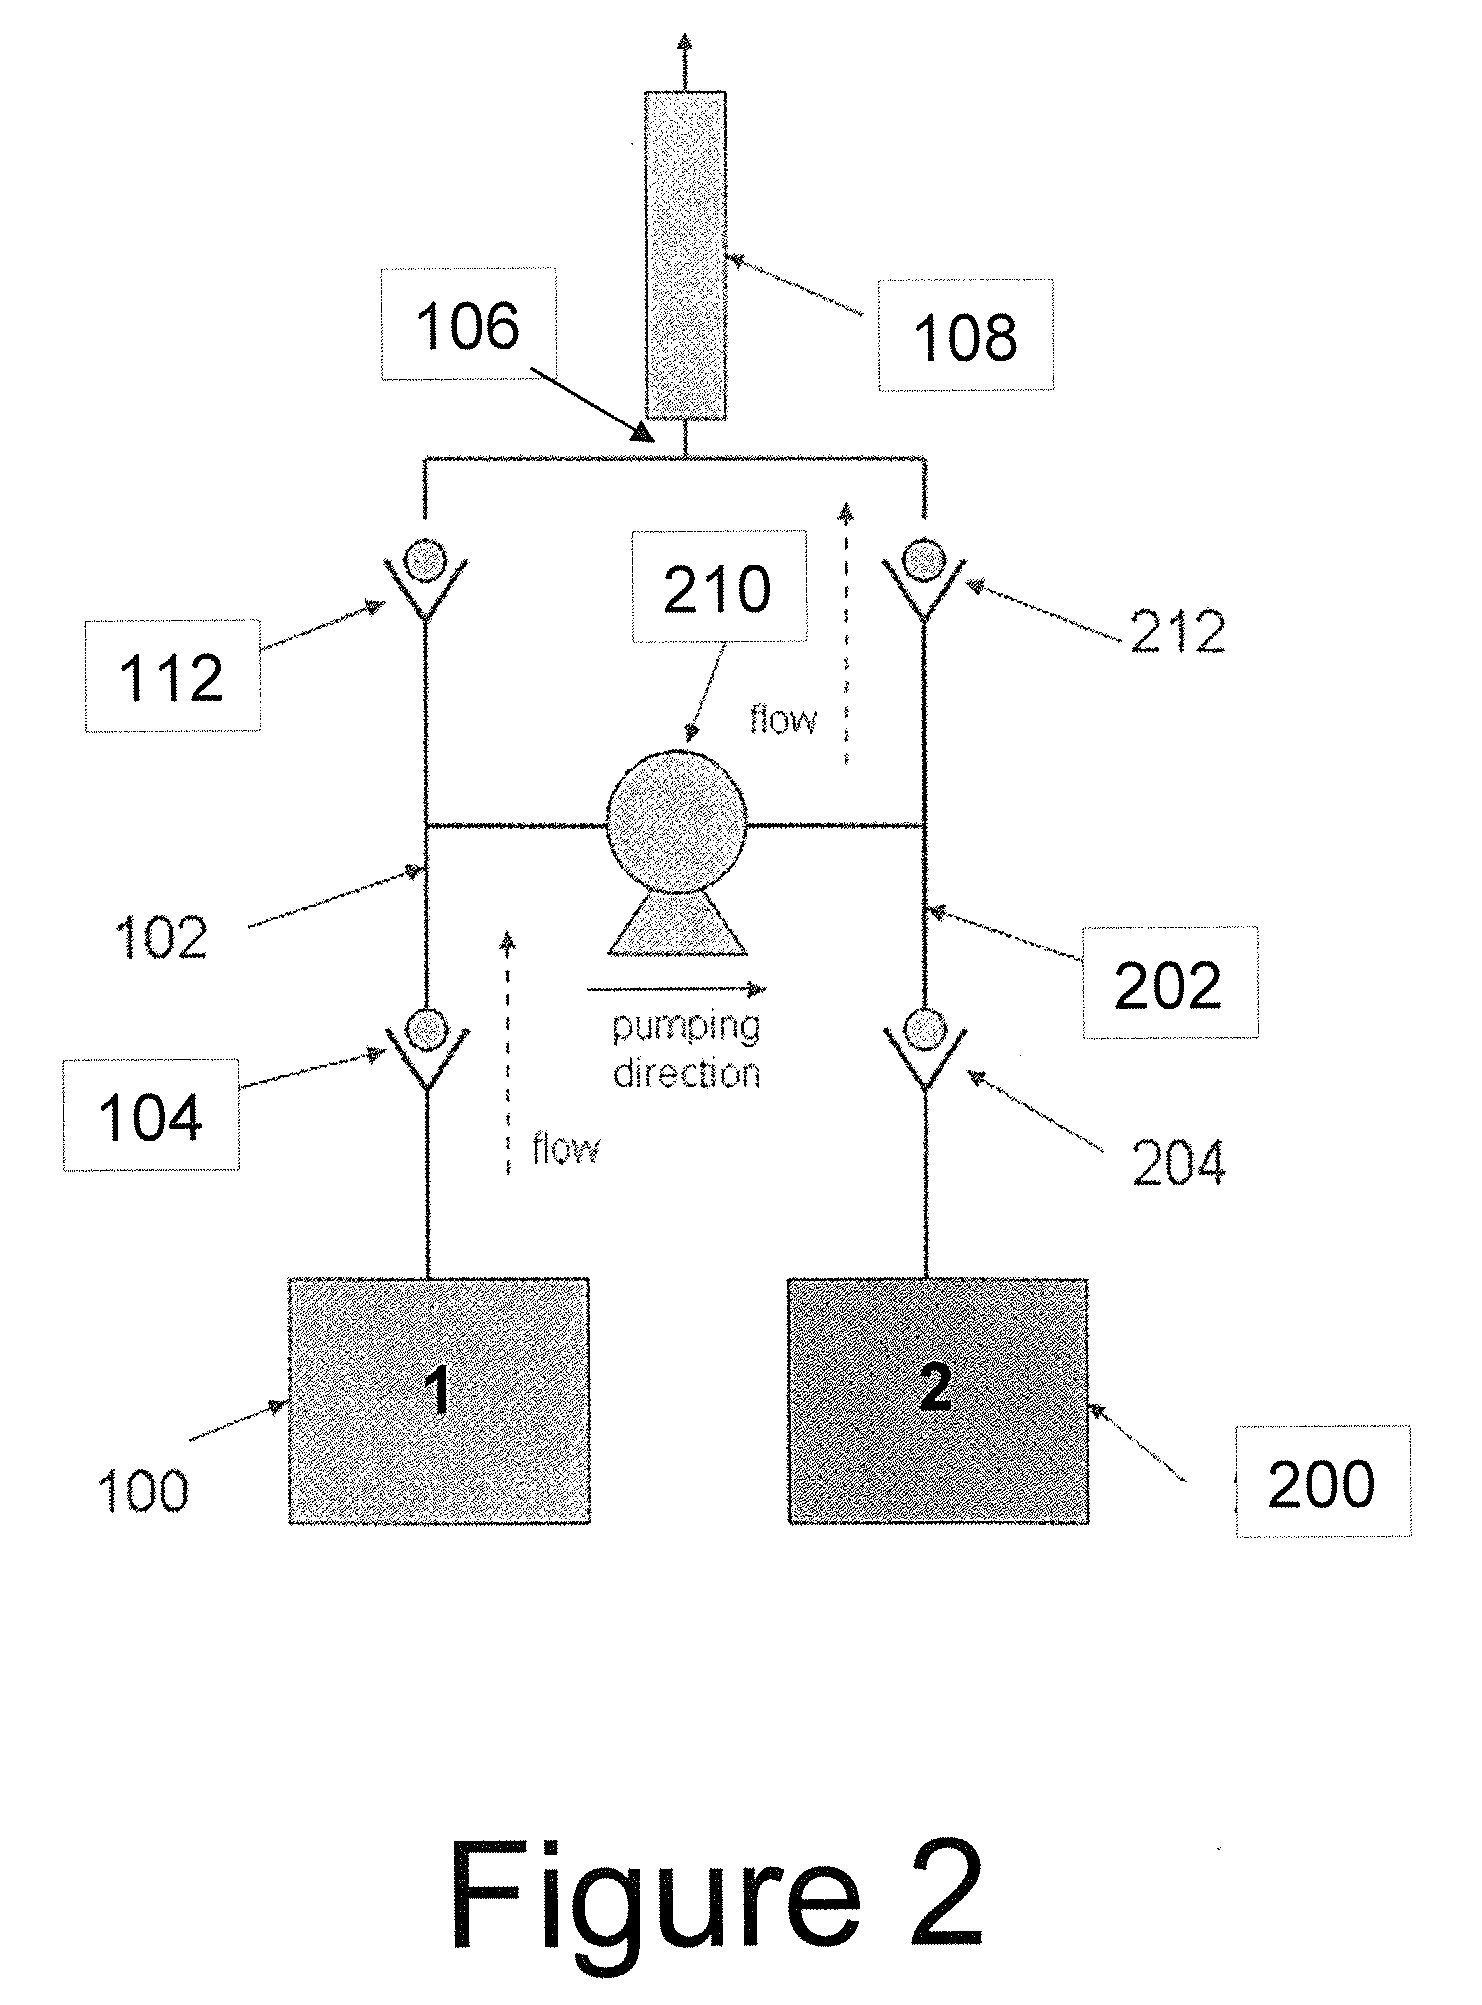 Systems and methods for generating hydrogen gas